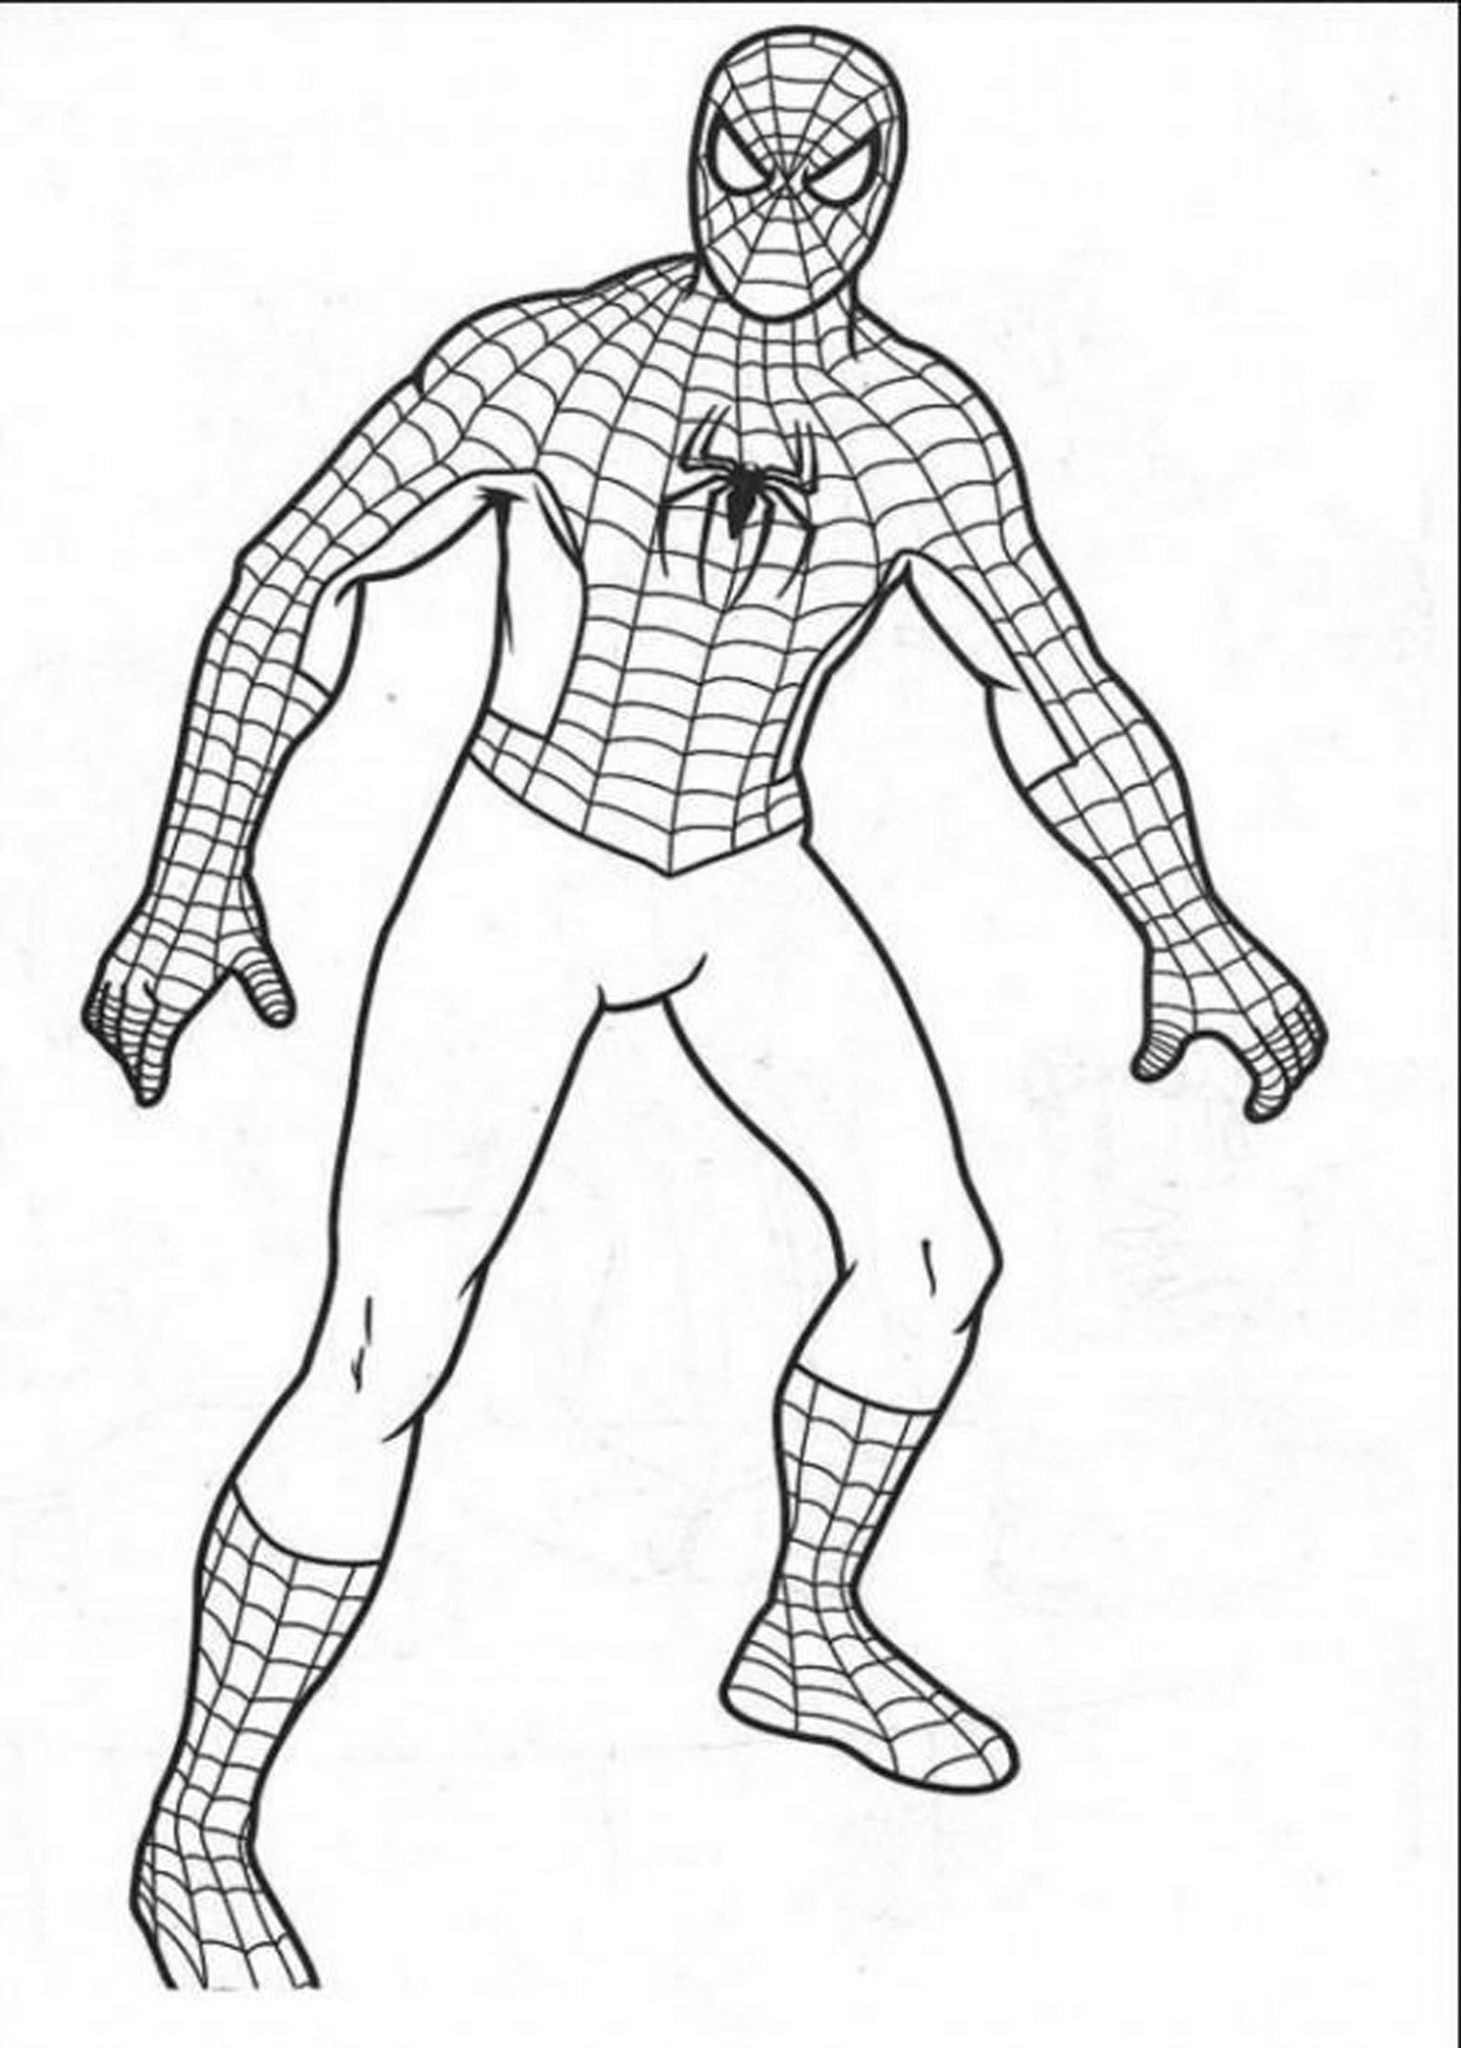 Fun Coloring Pages For Boys
 Coloring Pages for Boys & Training Shopping For Children